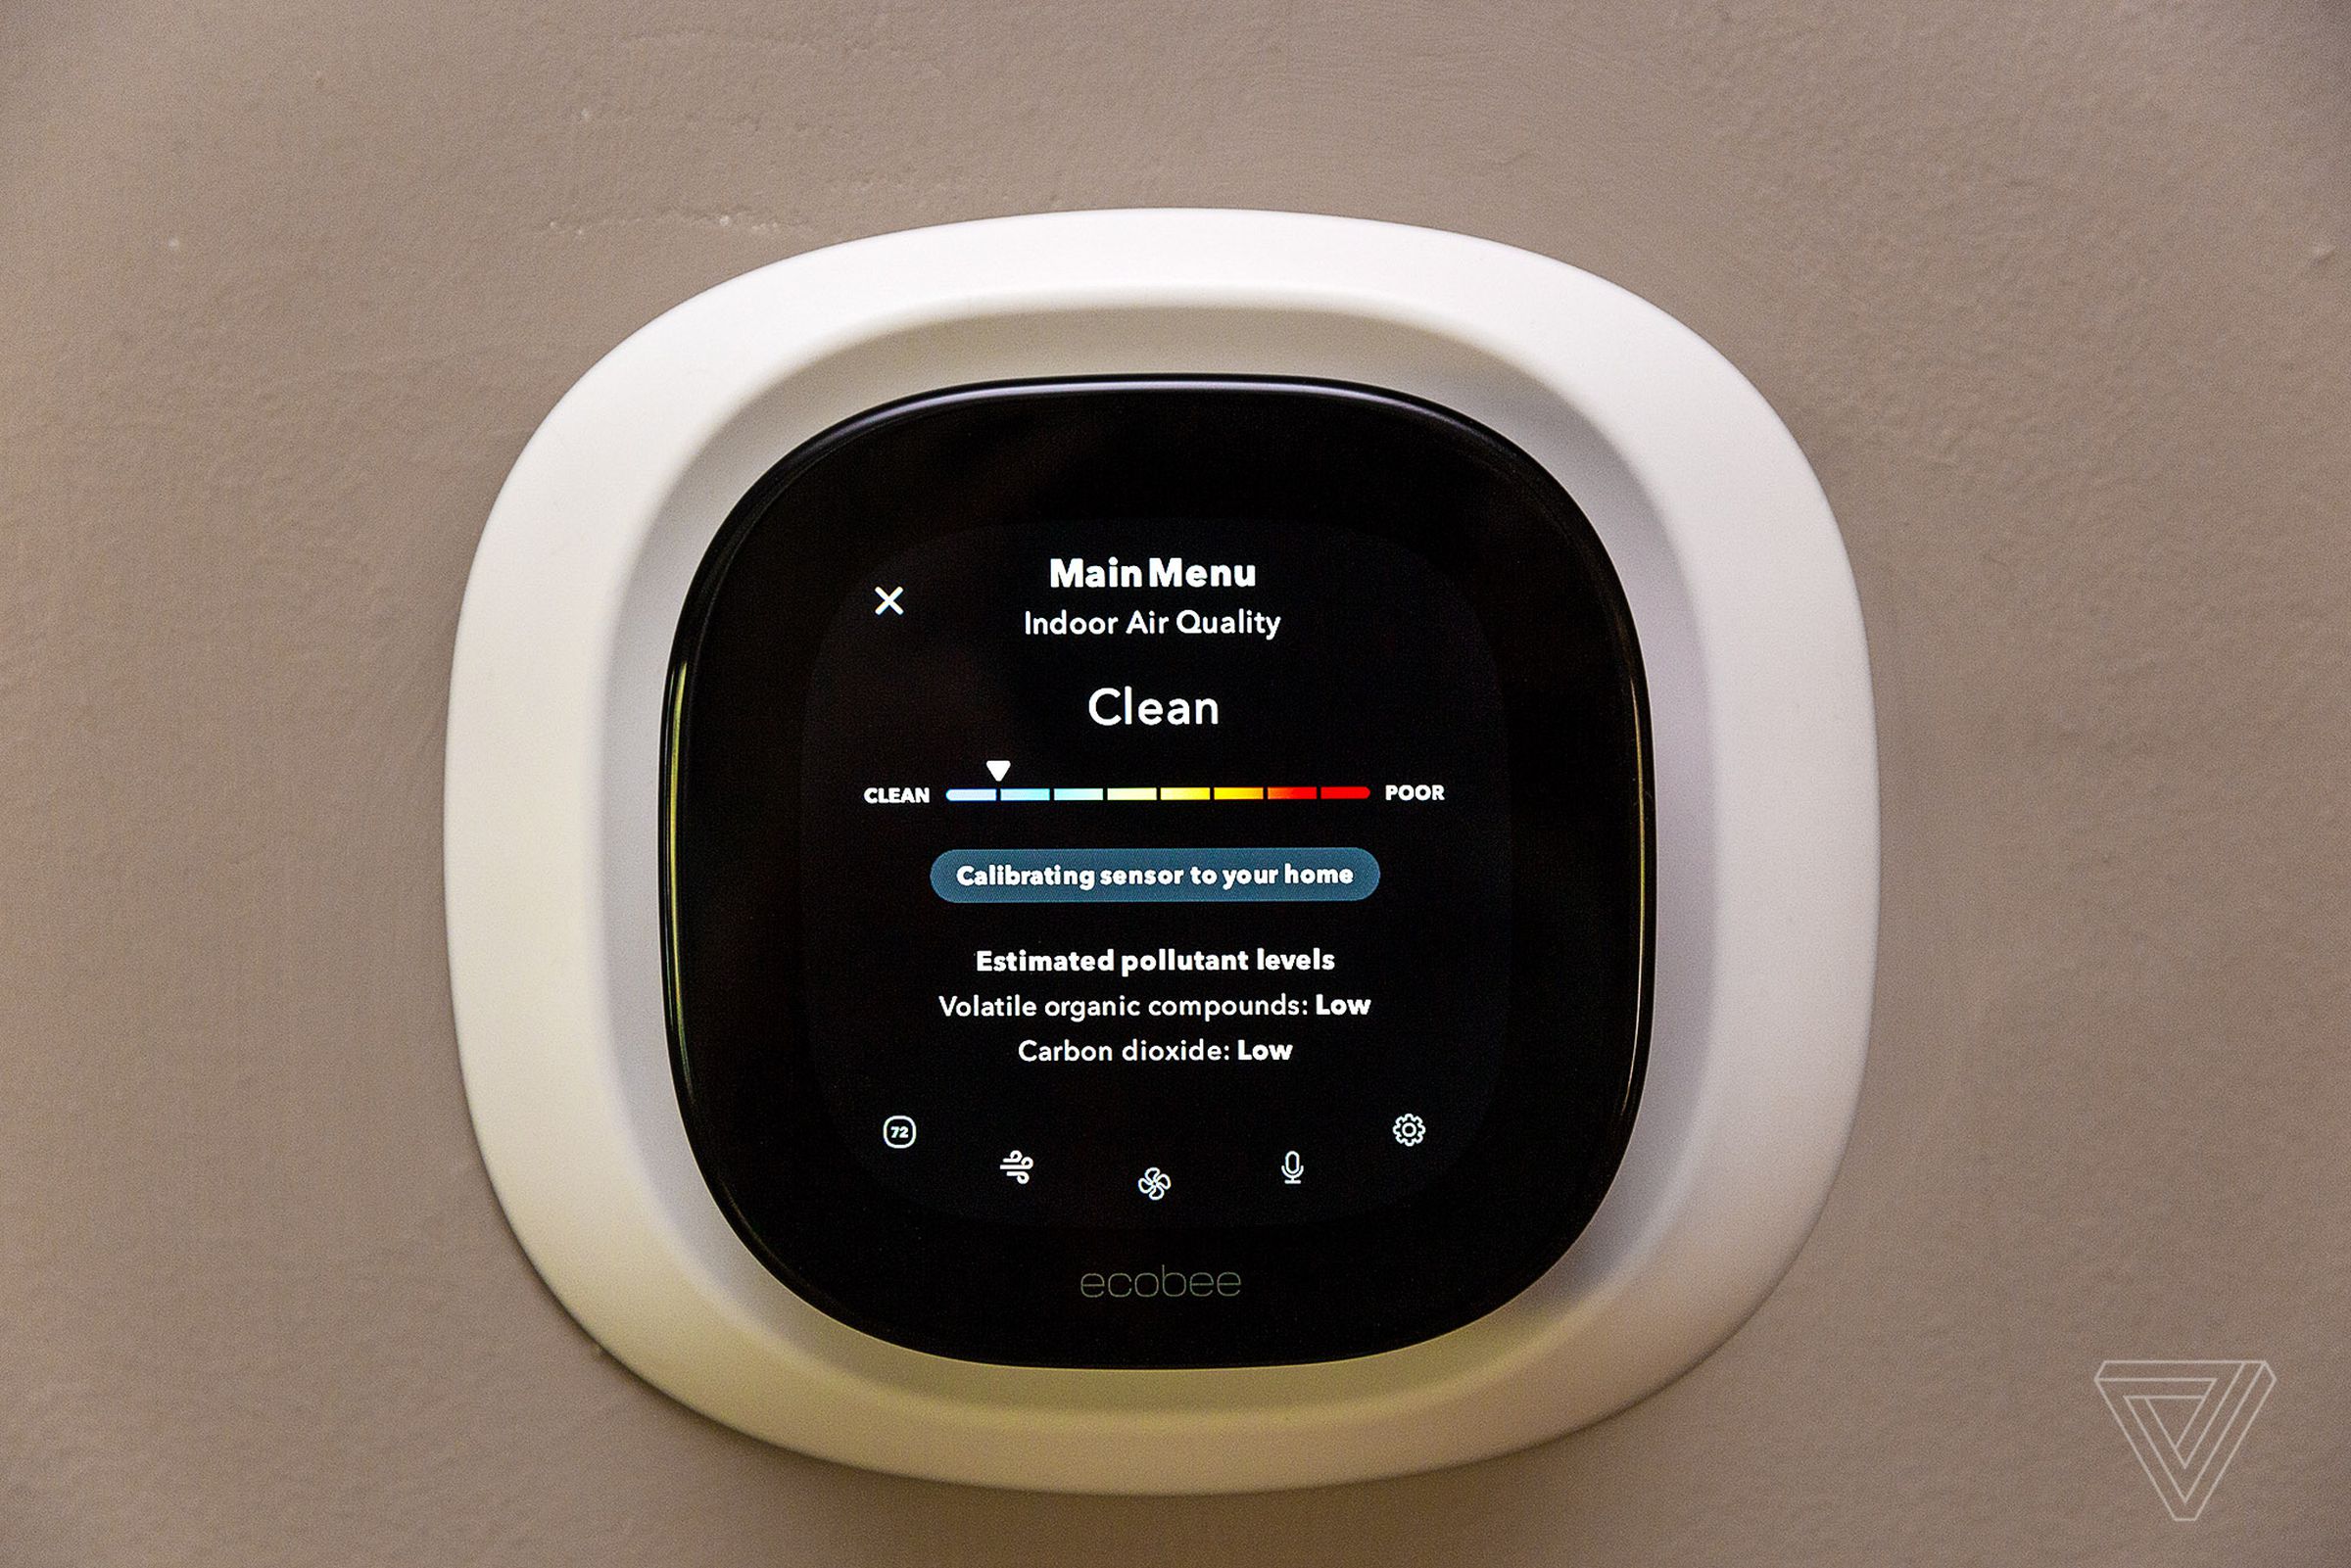 The indoor air quality monitor screen on the Premium thermostat.